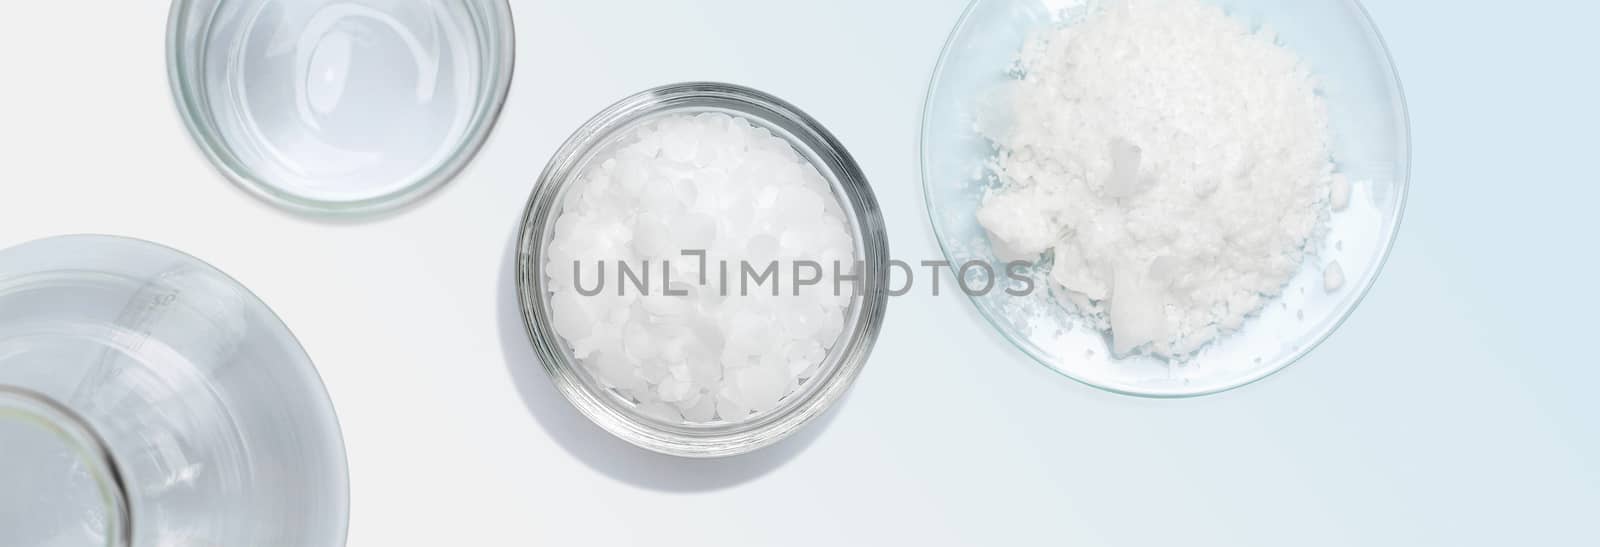 Cosmetic chemicals ingredient on table. Emulsifier, Ethanolamine, Acid, Cetyl Alcohol